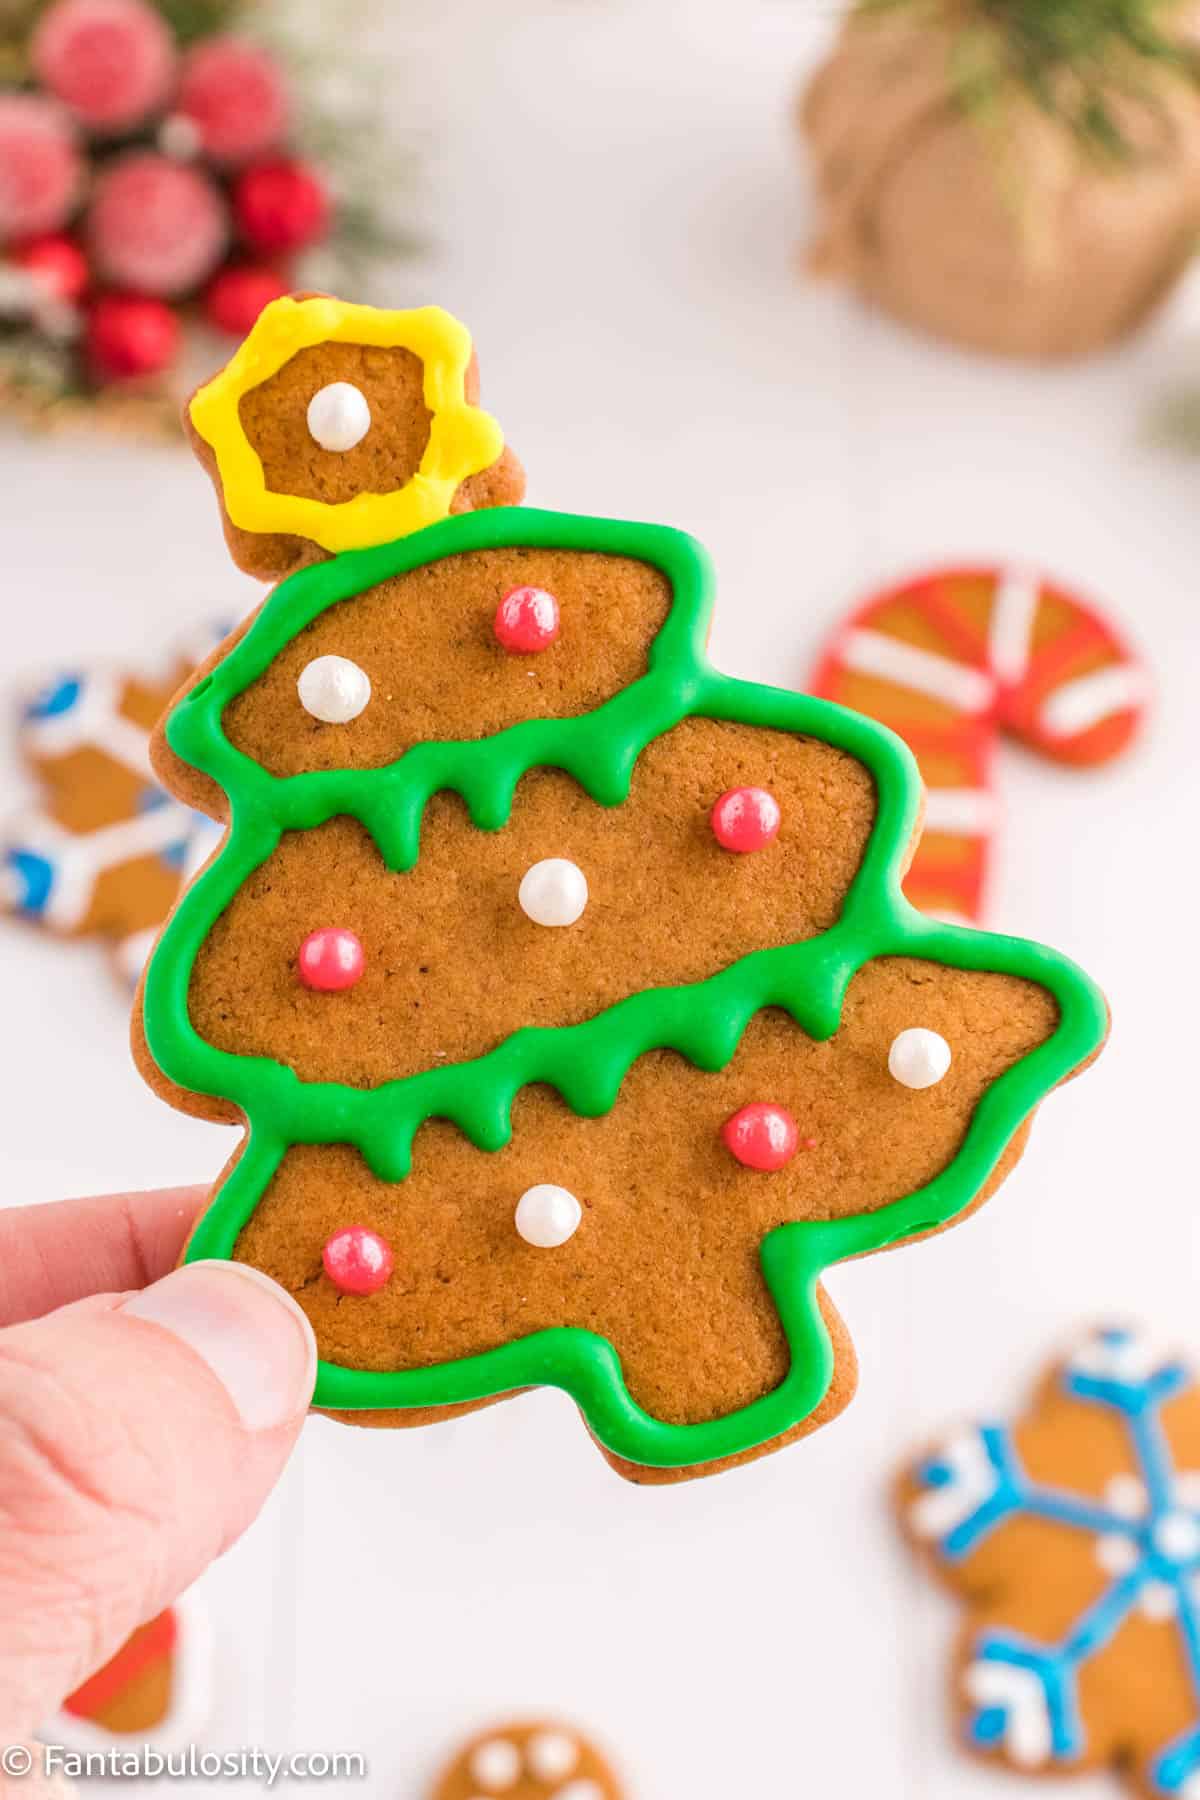 A hand is holding a Christmas tree shaped gingerbread cookie with bright frosting and pearl sugar ornaments